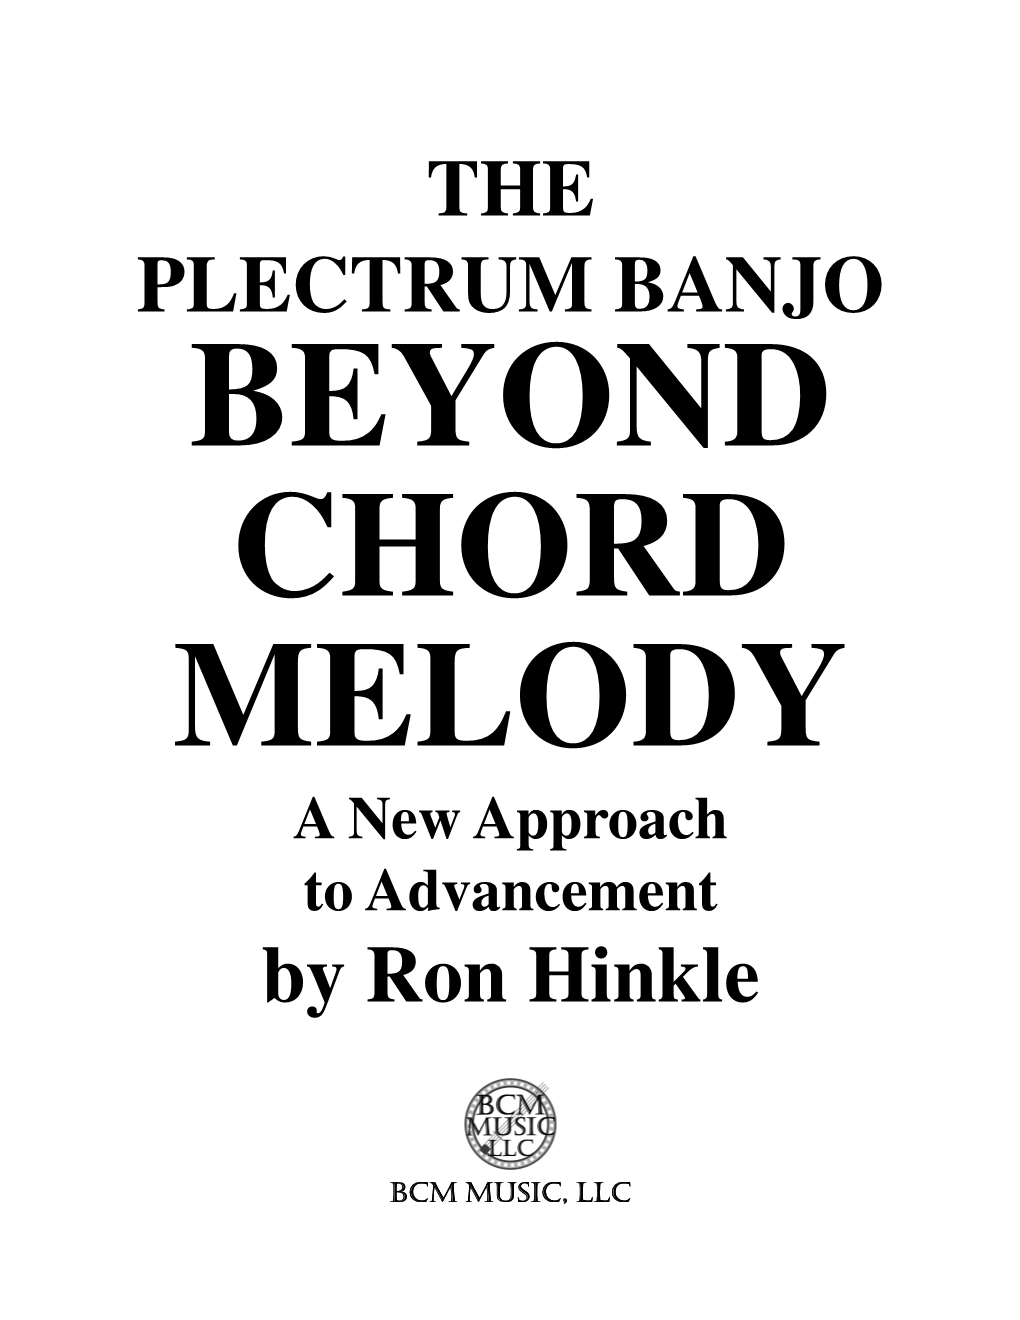 THE PLECTRUM BANJO by Ron Hinkle